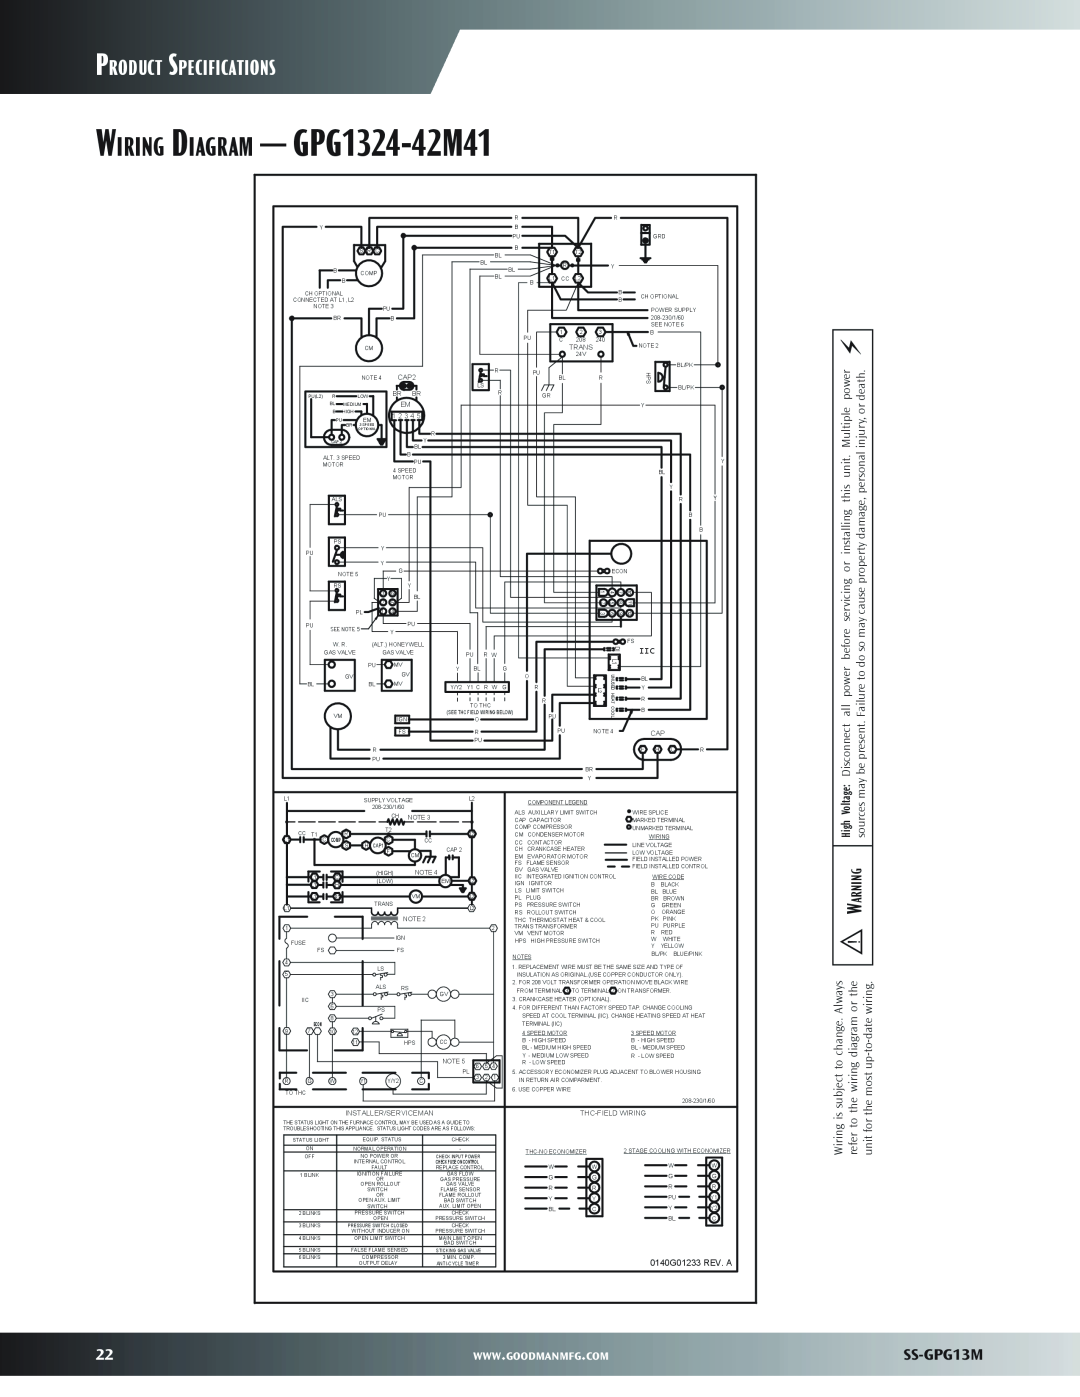 Goodman Mfg Wiring Diagram - GPG1324-42M41, Product Specifications, power death, Multiple, SS-GPG13M, injury, or 